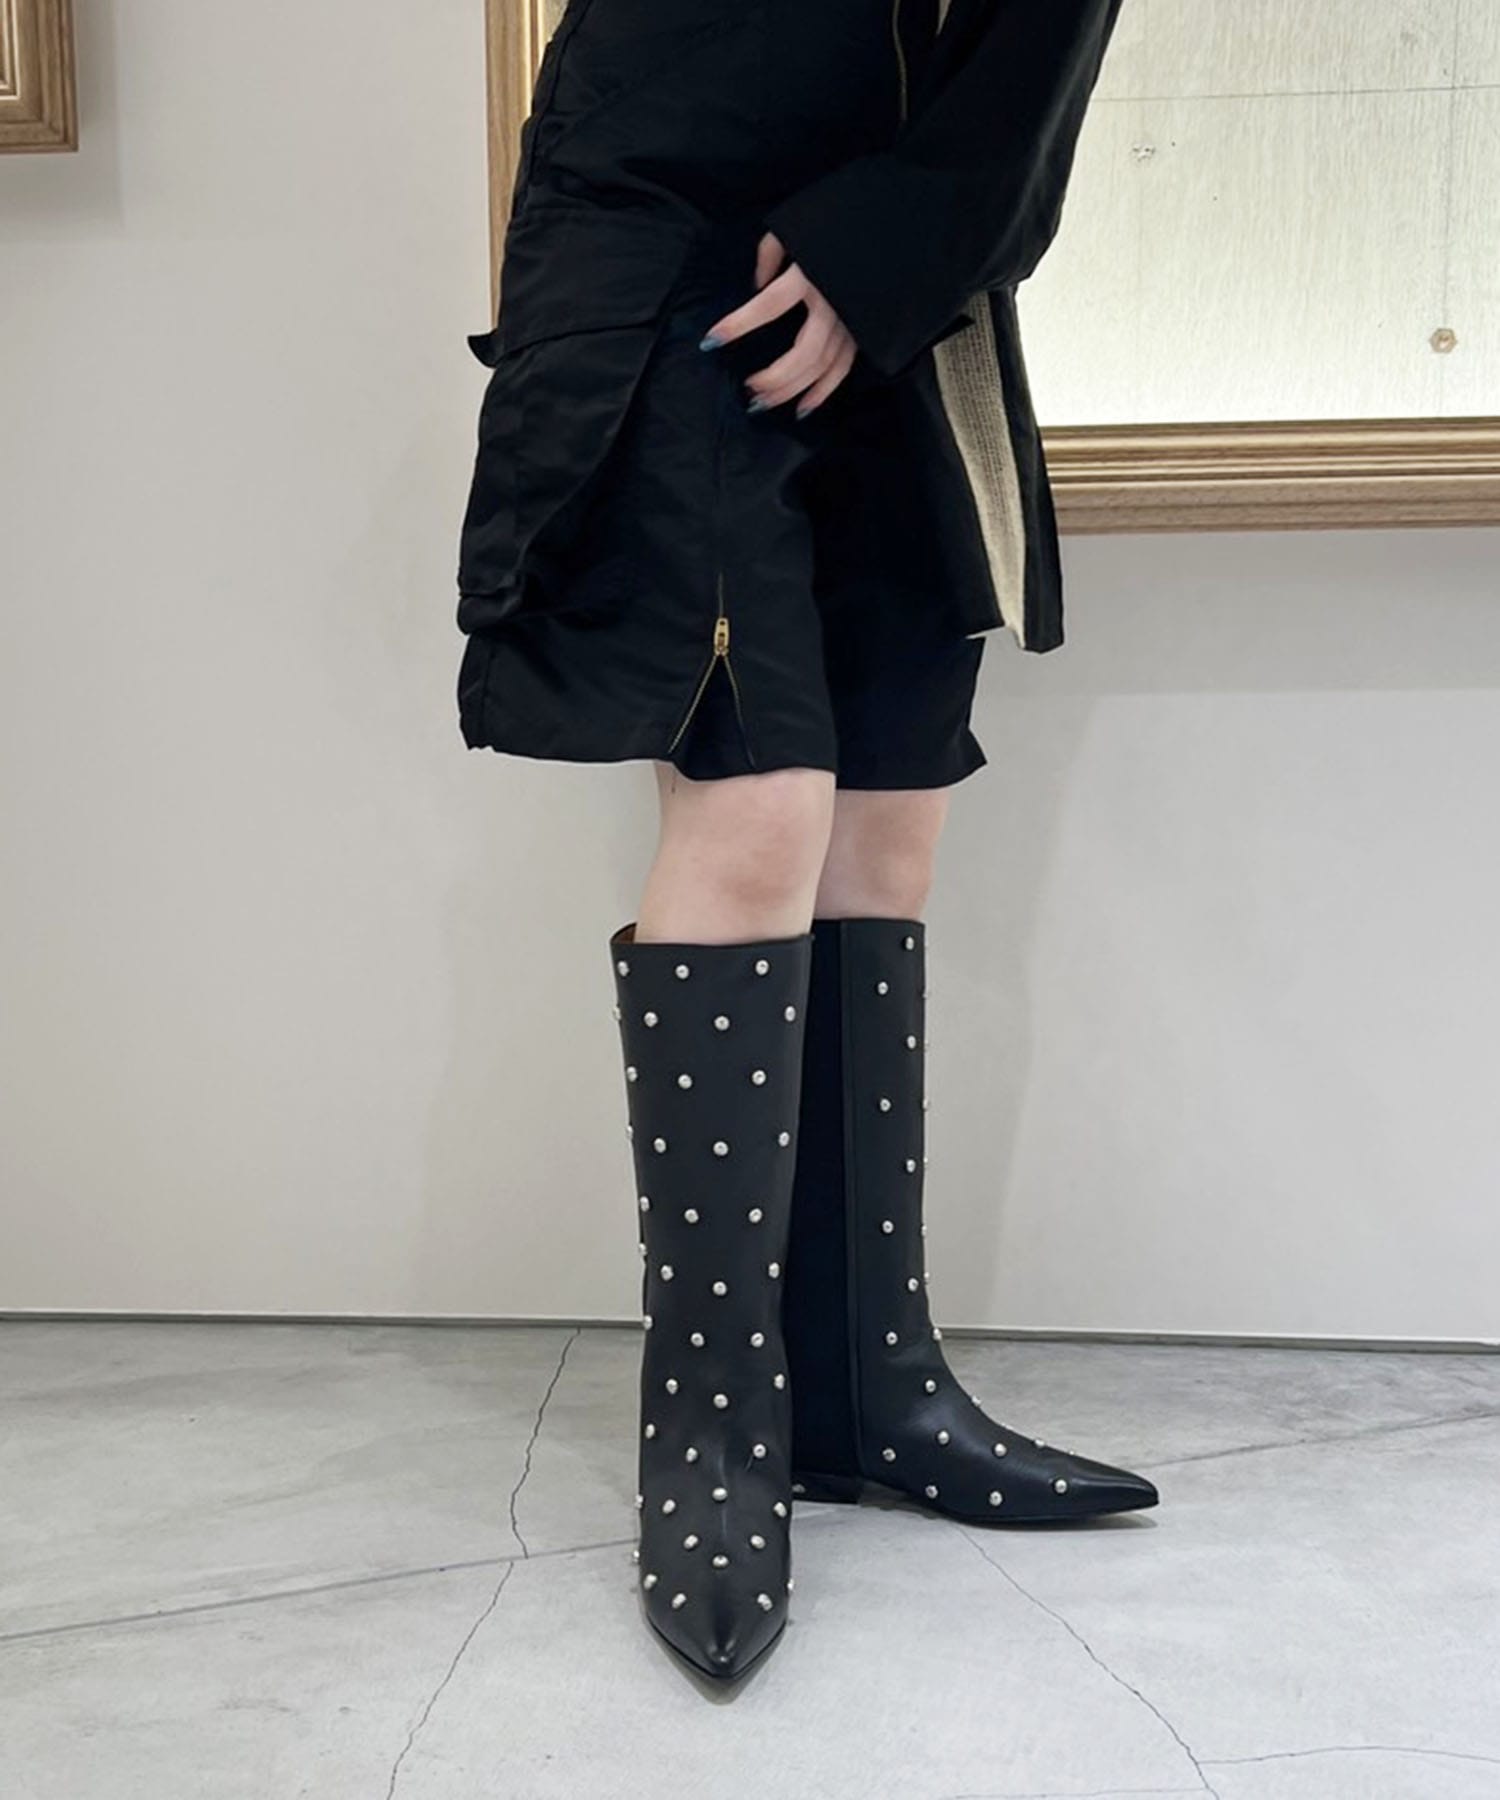 long boots　BLACK LEATHER TOGA PULLA